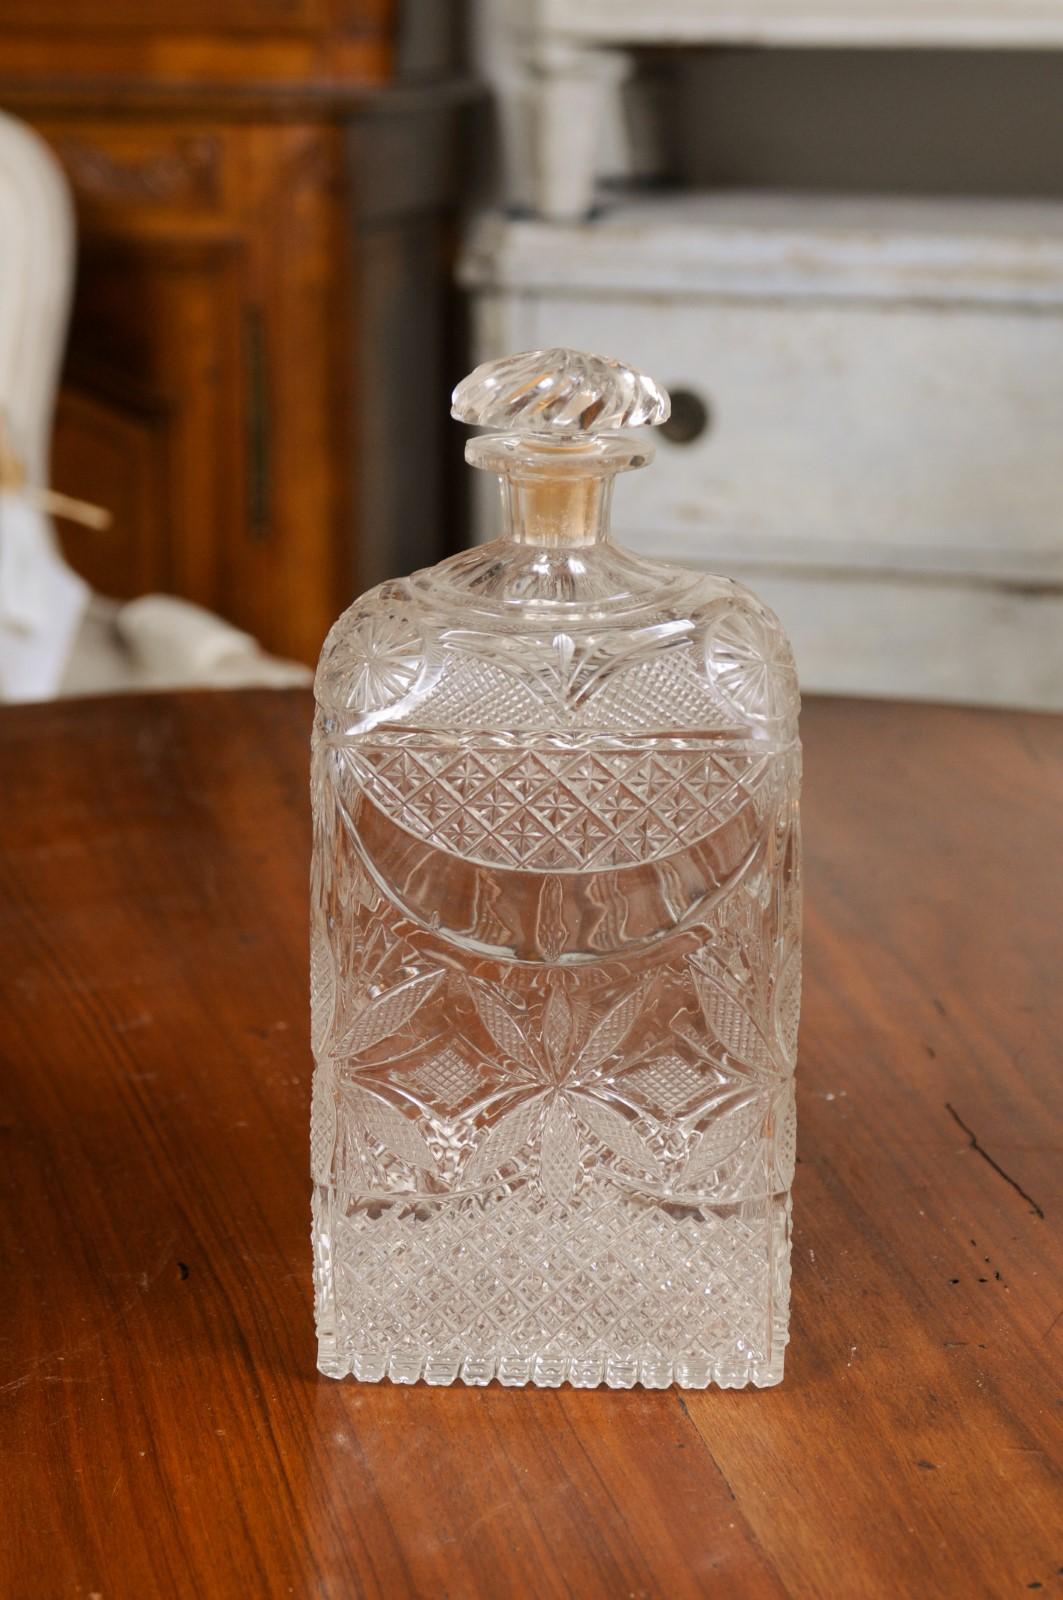 An English Victorian period glass vanity bottle from the 19th century, with etched décor. Created in England during the Victorian era, this vanity bottle features a twisted stopper resting on an abundantly adorned body. Showcasing diamond motifs